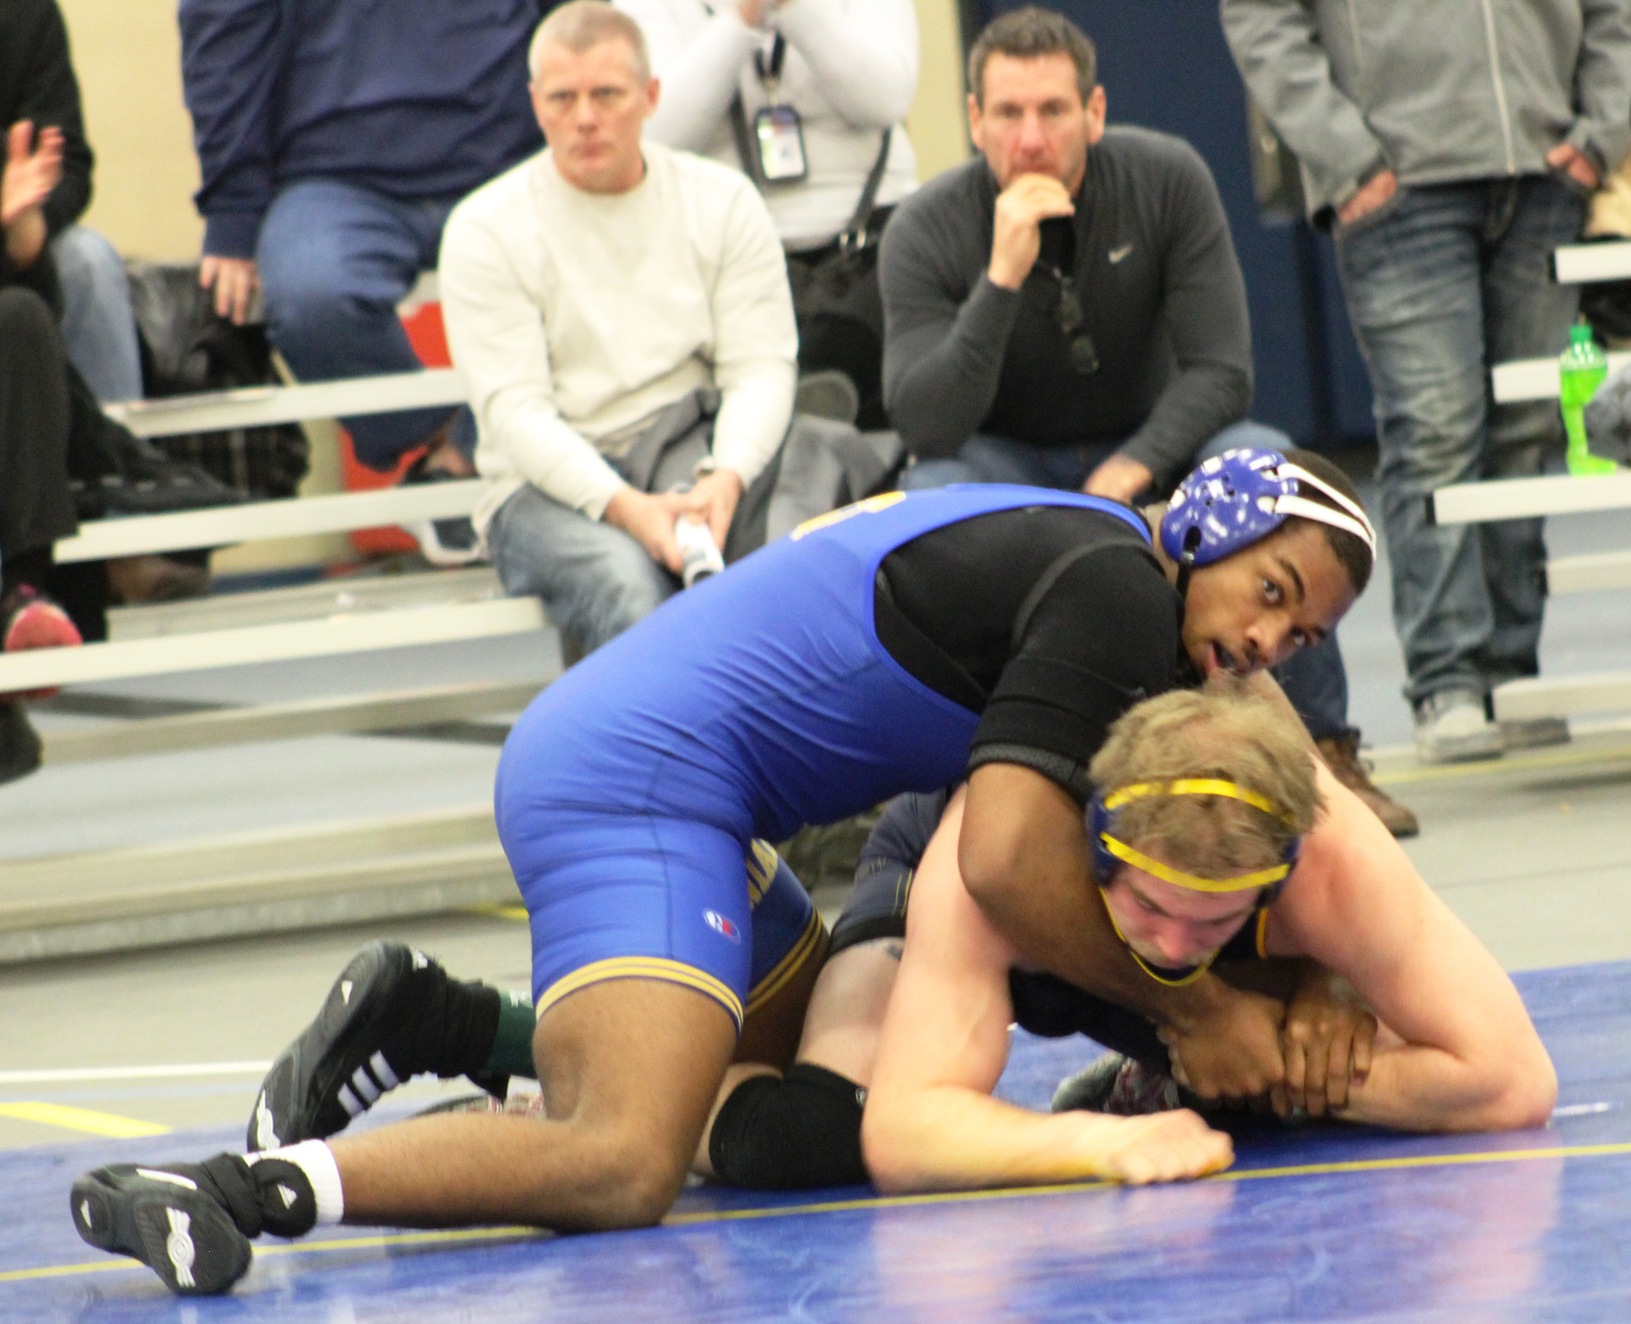 NIACC's Jaylen Lee controls RCTC's Dustin Lee in their 184-pound match Thursday in the NIACC recreation center. NIACC's Lee gained a pin in 4:31 to lift the Trojans to a 24-16 dual-meet victory.